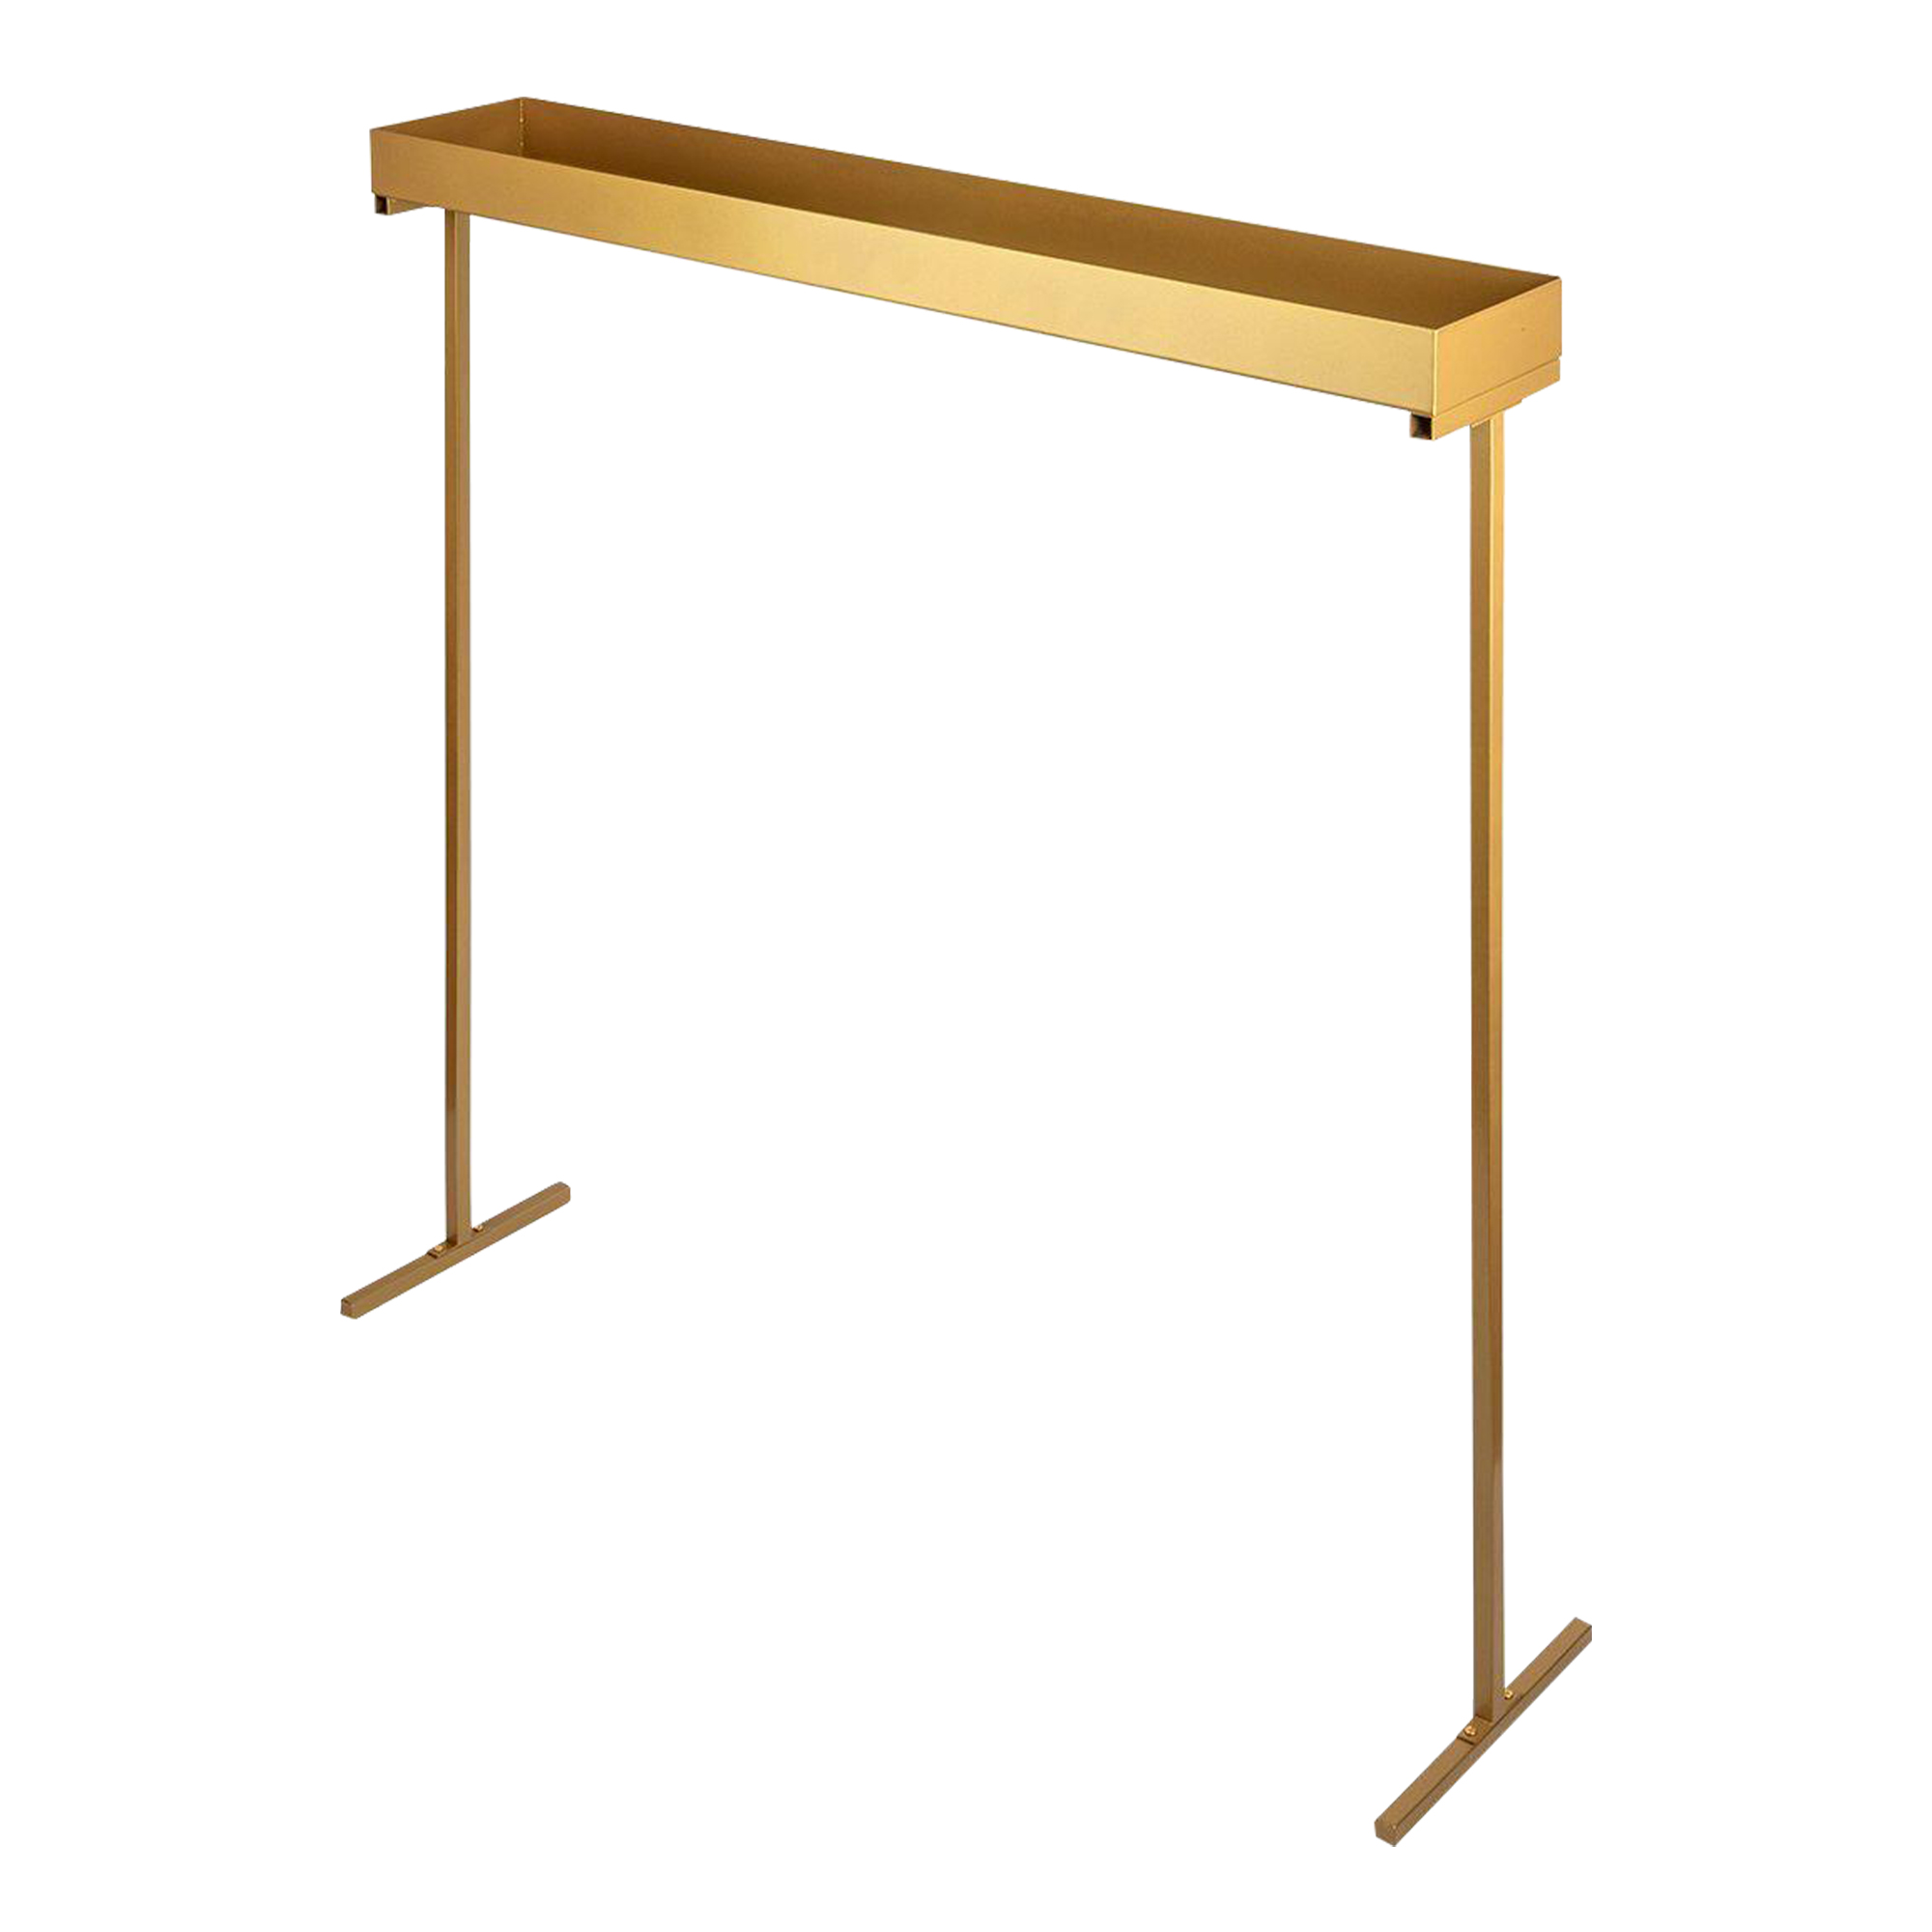 Metal Tabletop Flower Stand 39" - Gold